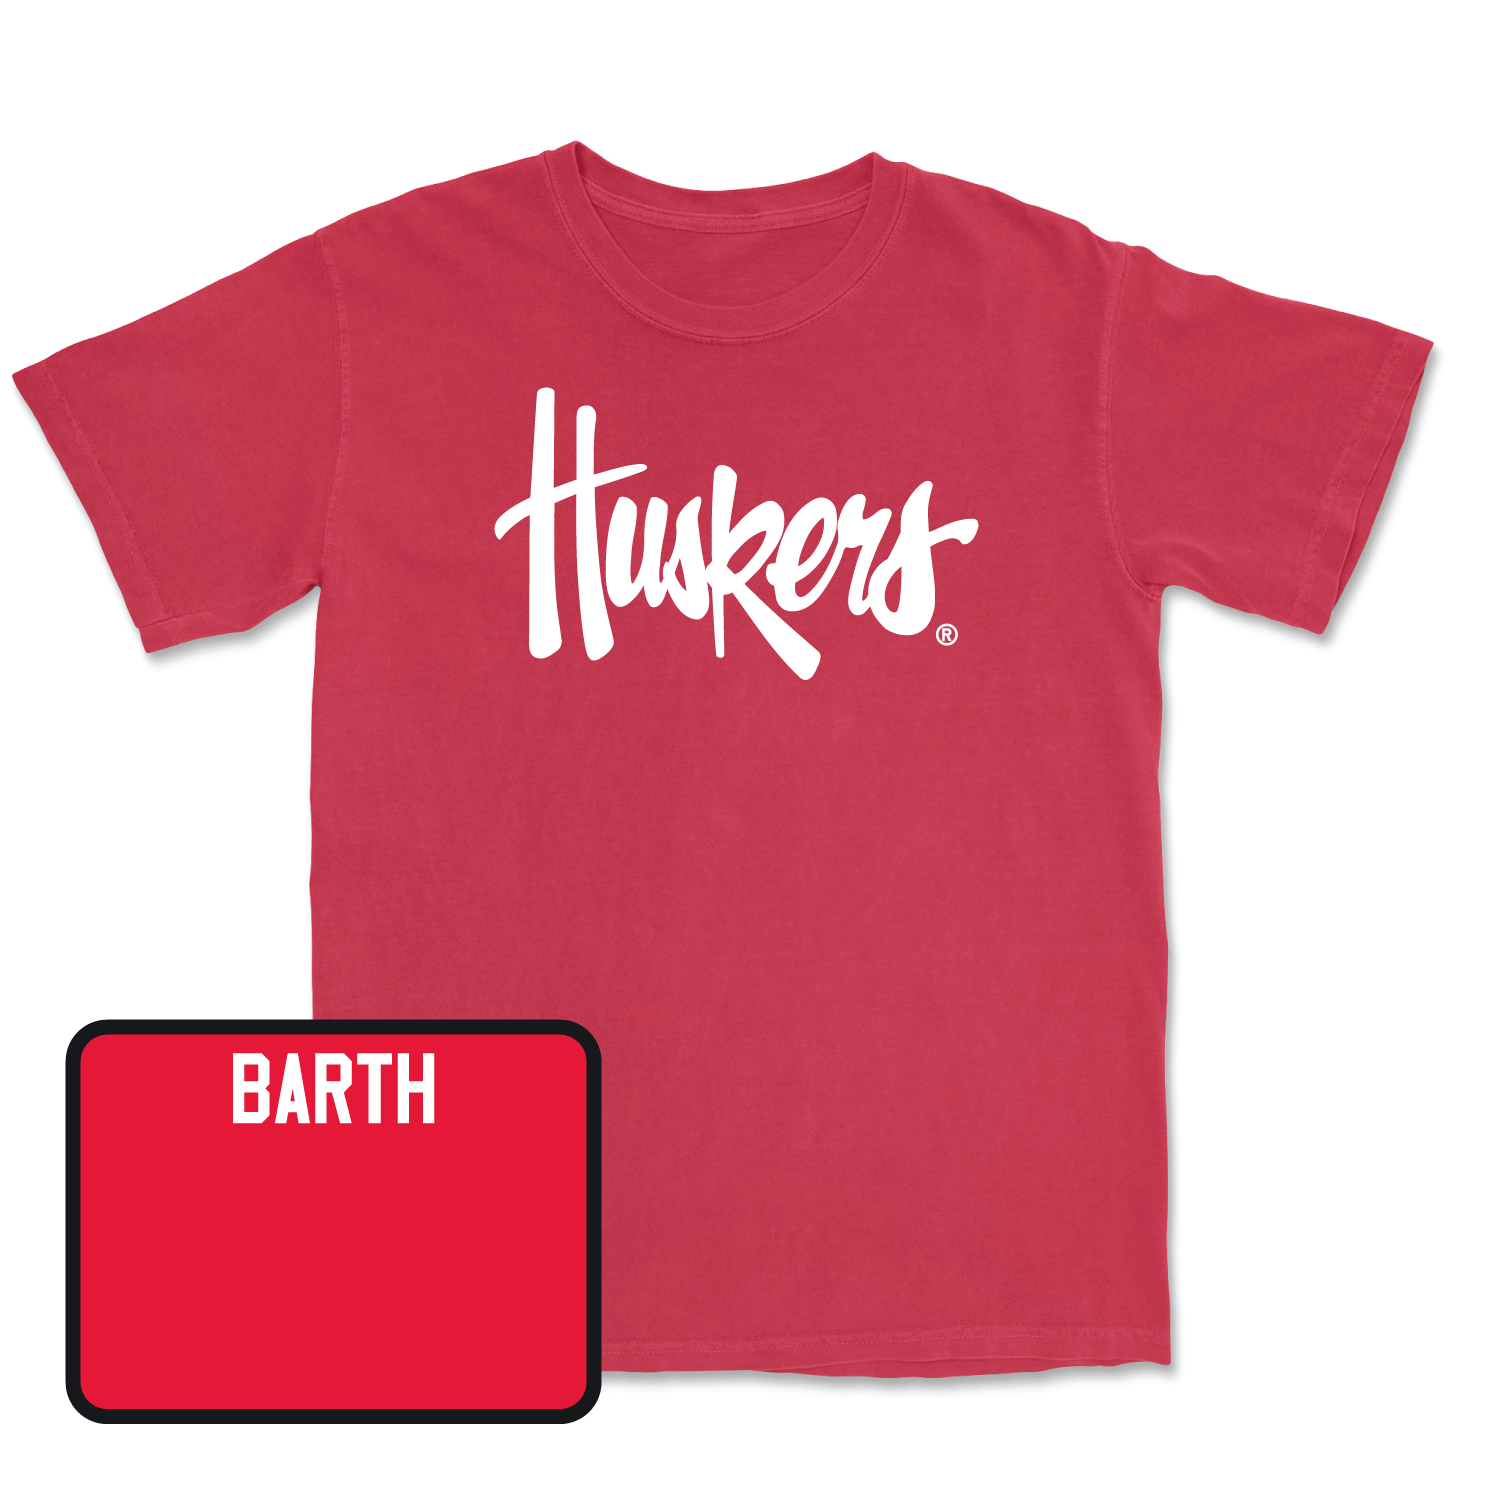 Red Women's Gymnastics Huskers Tee Youth Large / Katelyn Barth